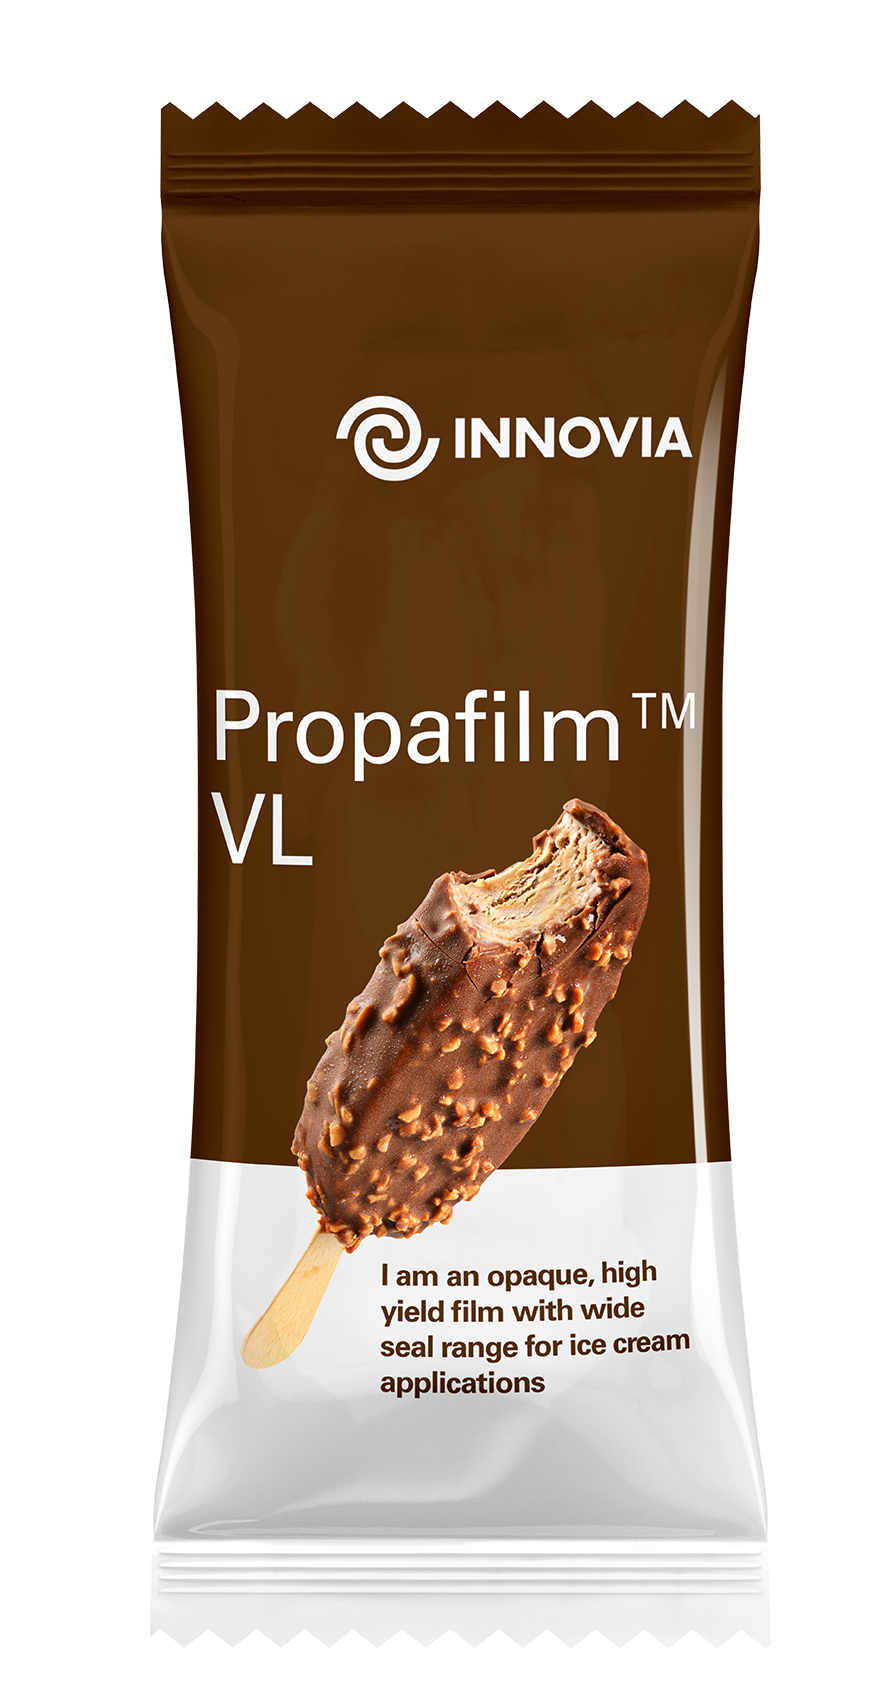 Ice, Ice, Baby! Innovia launches dedicated low density film for ice cream flow wrap packaging